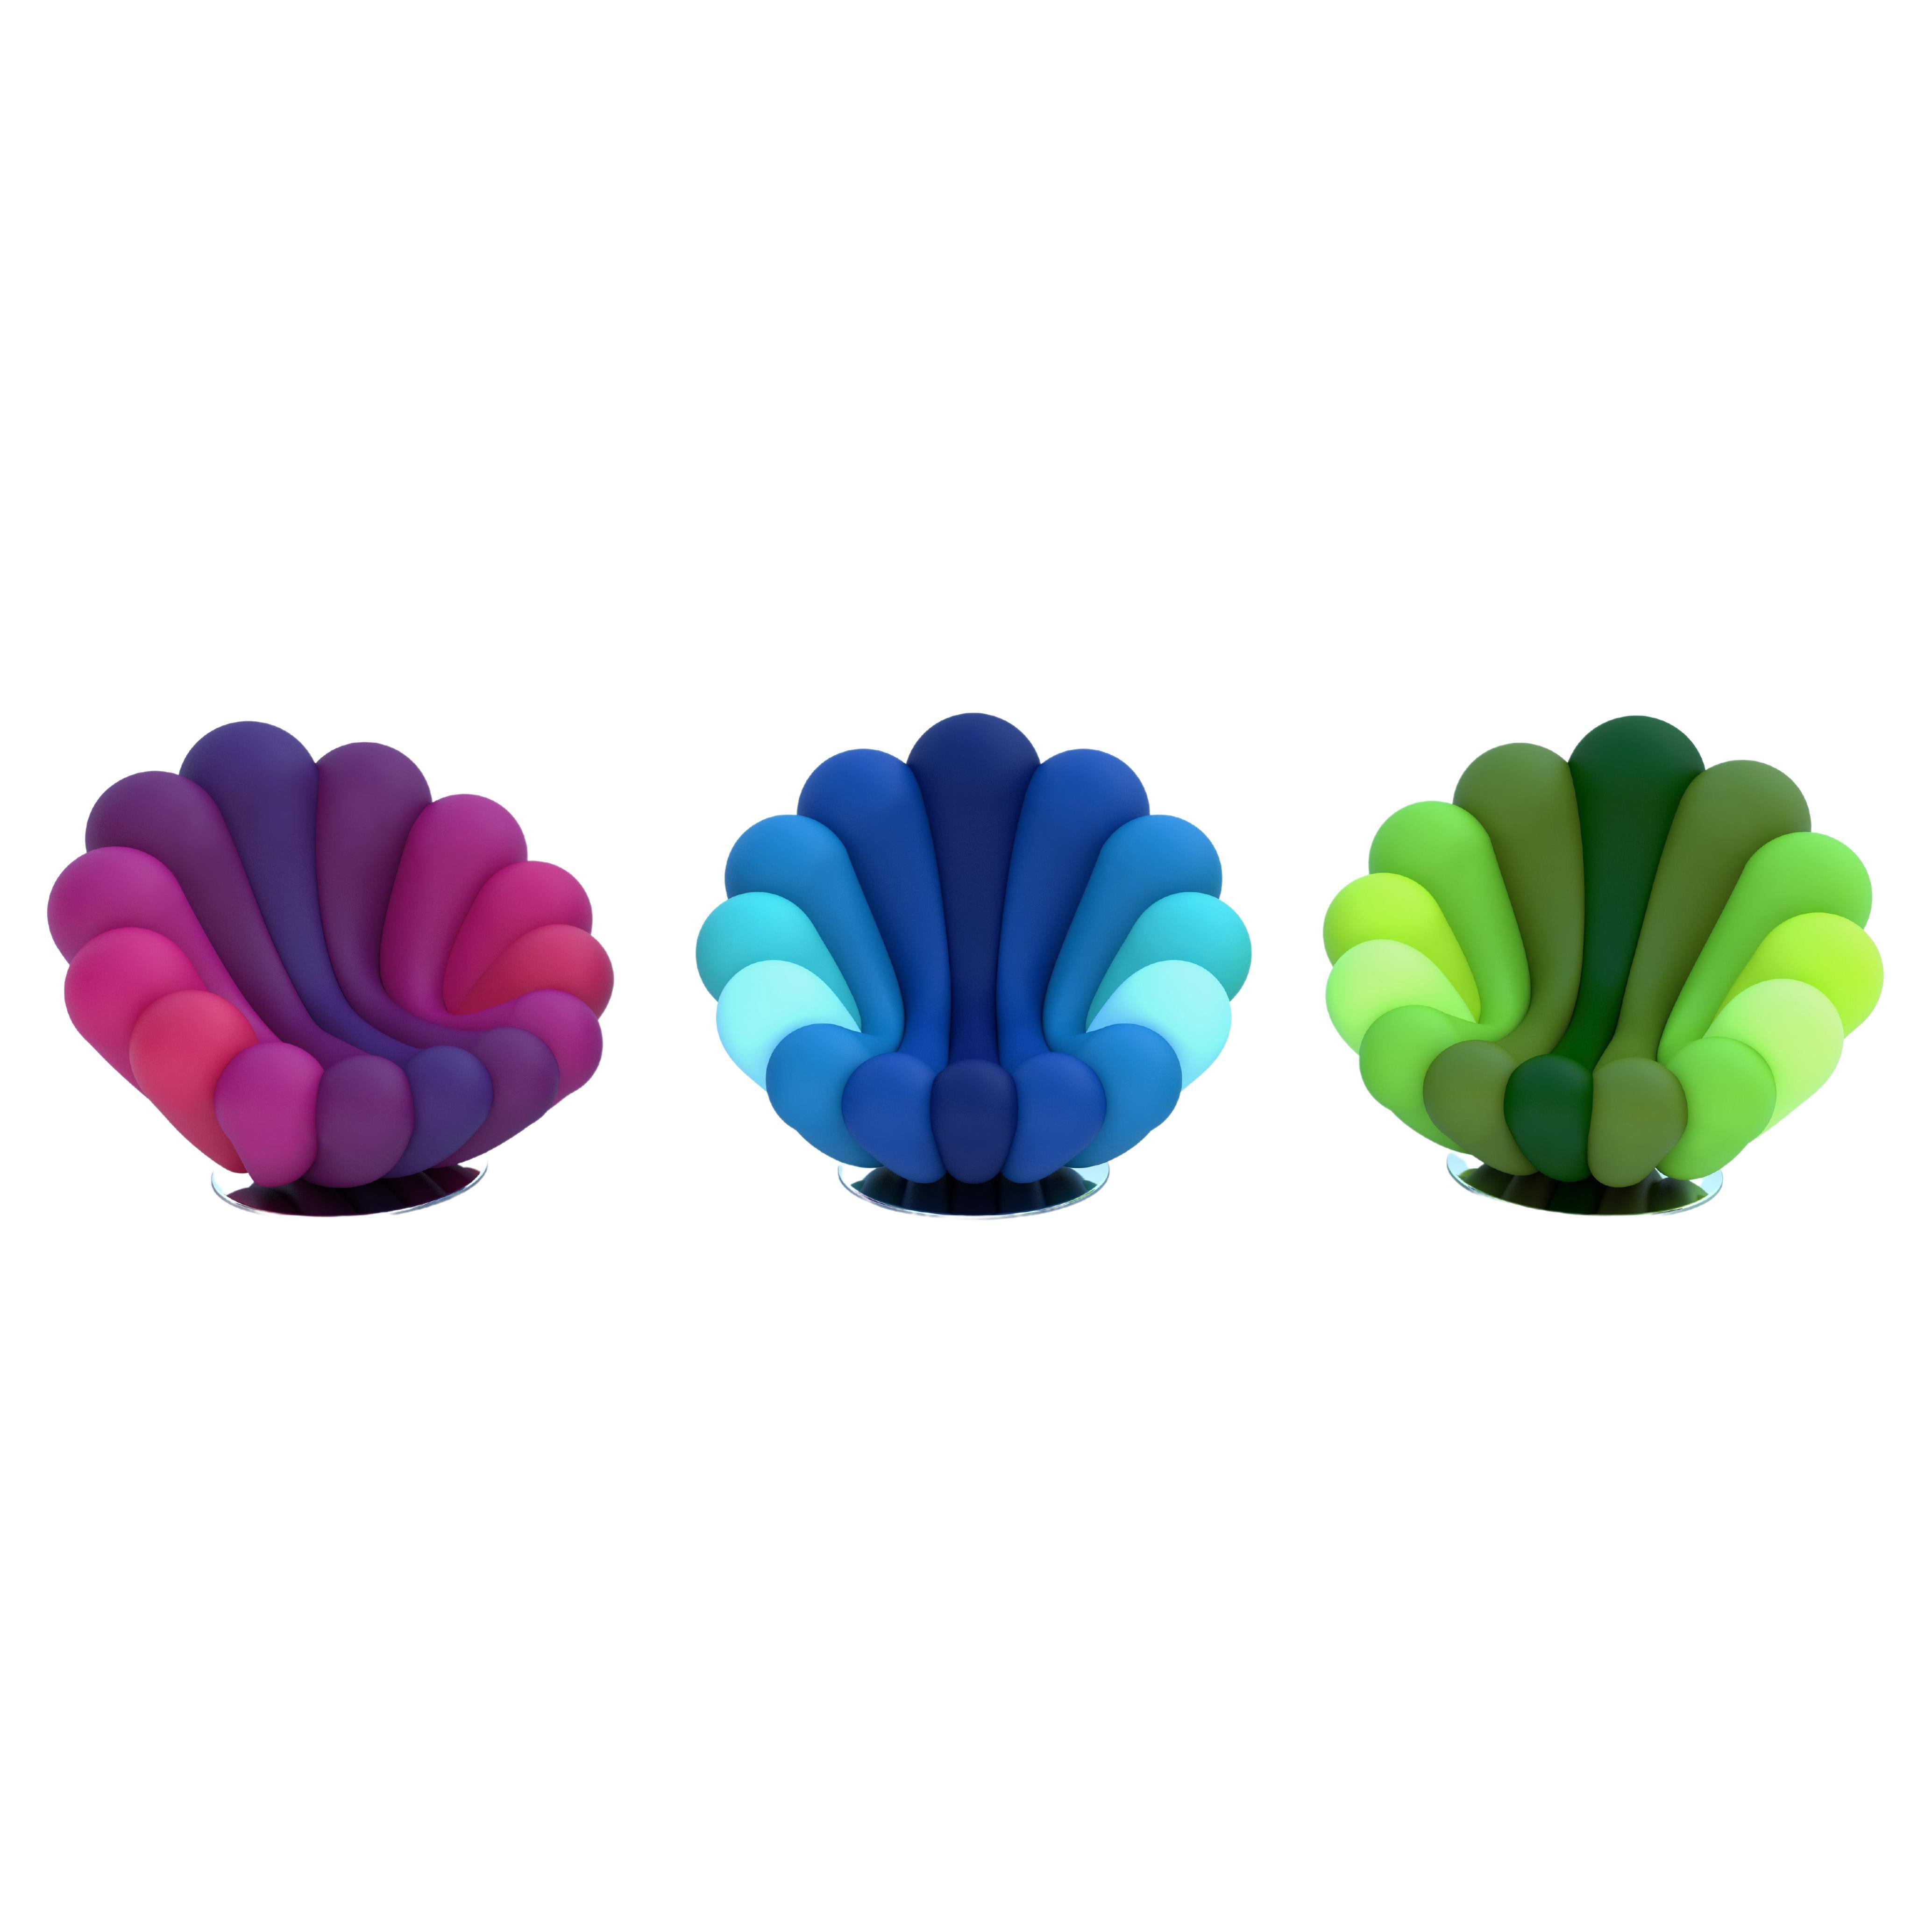 A comfortable swivel armchair that reminds us soft shapes of Anemone from sea.
Swimming like happy fishes in the warm shapes of sea, feeling comfortable and protected within the big embrace of a colourful anemone.

